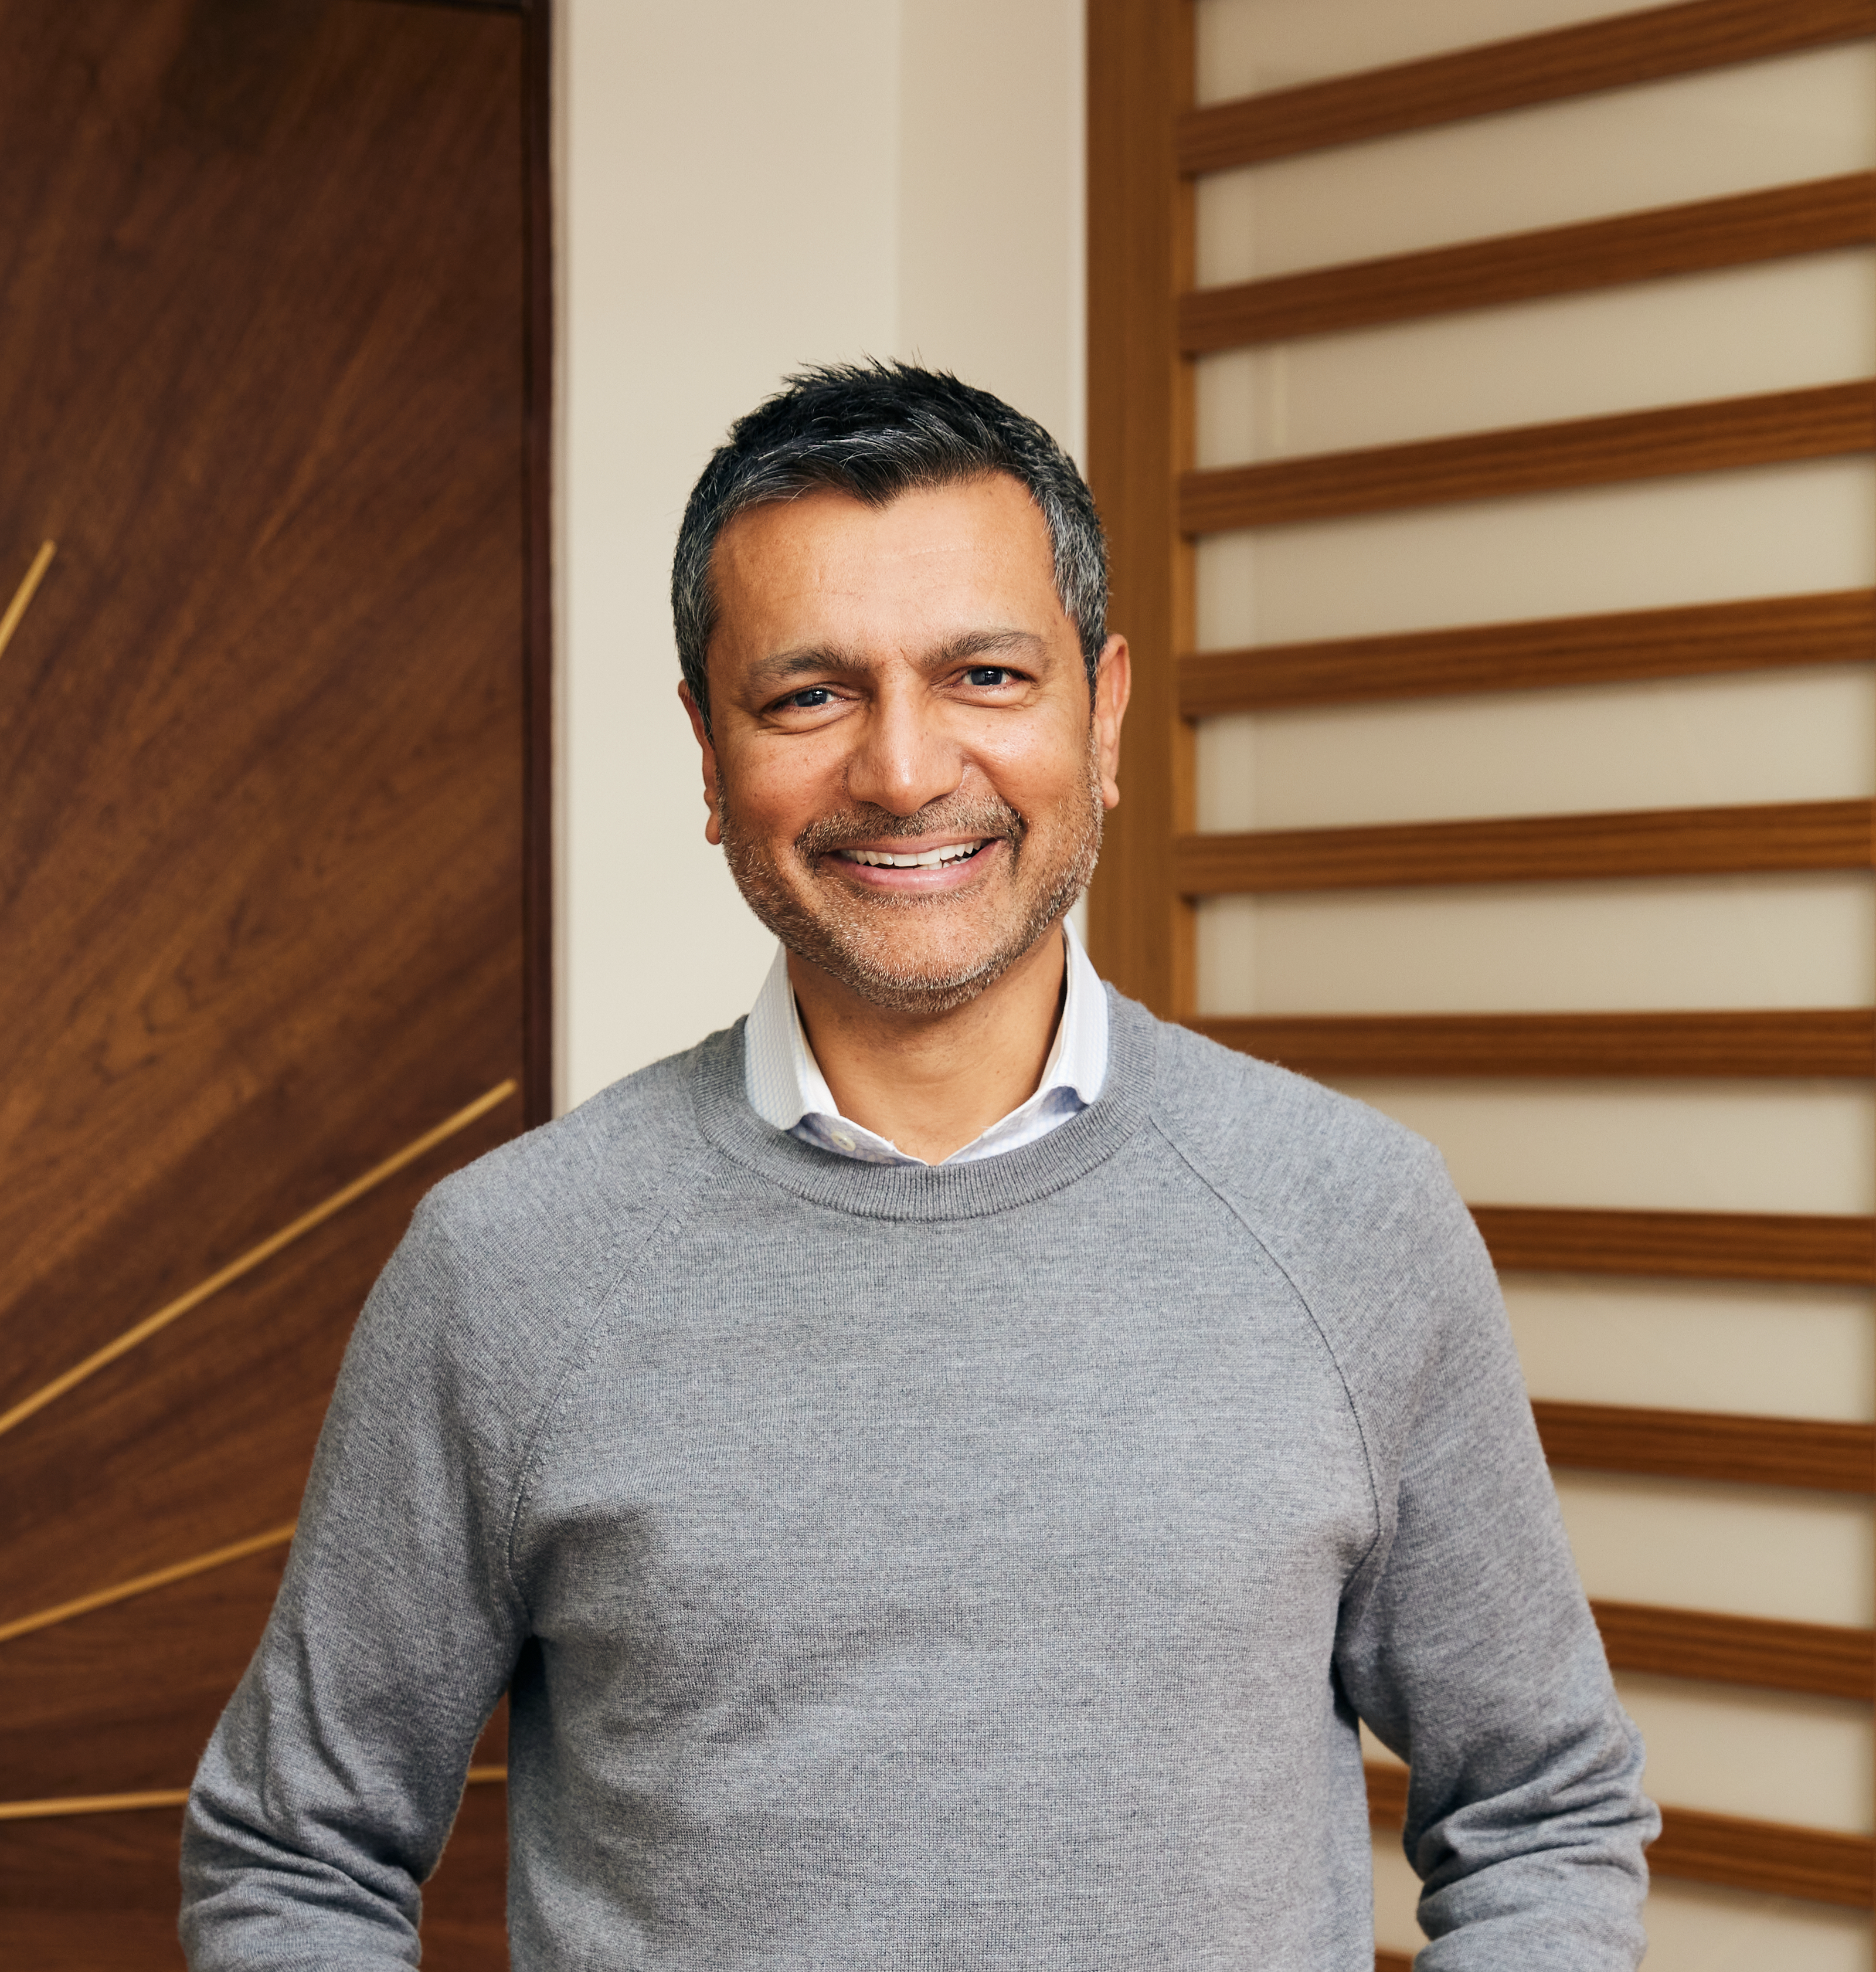 Dharam Rai, SVP of Customer Success at Sonos, sitting on a couch smiling